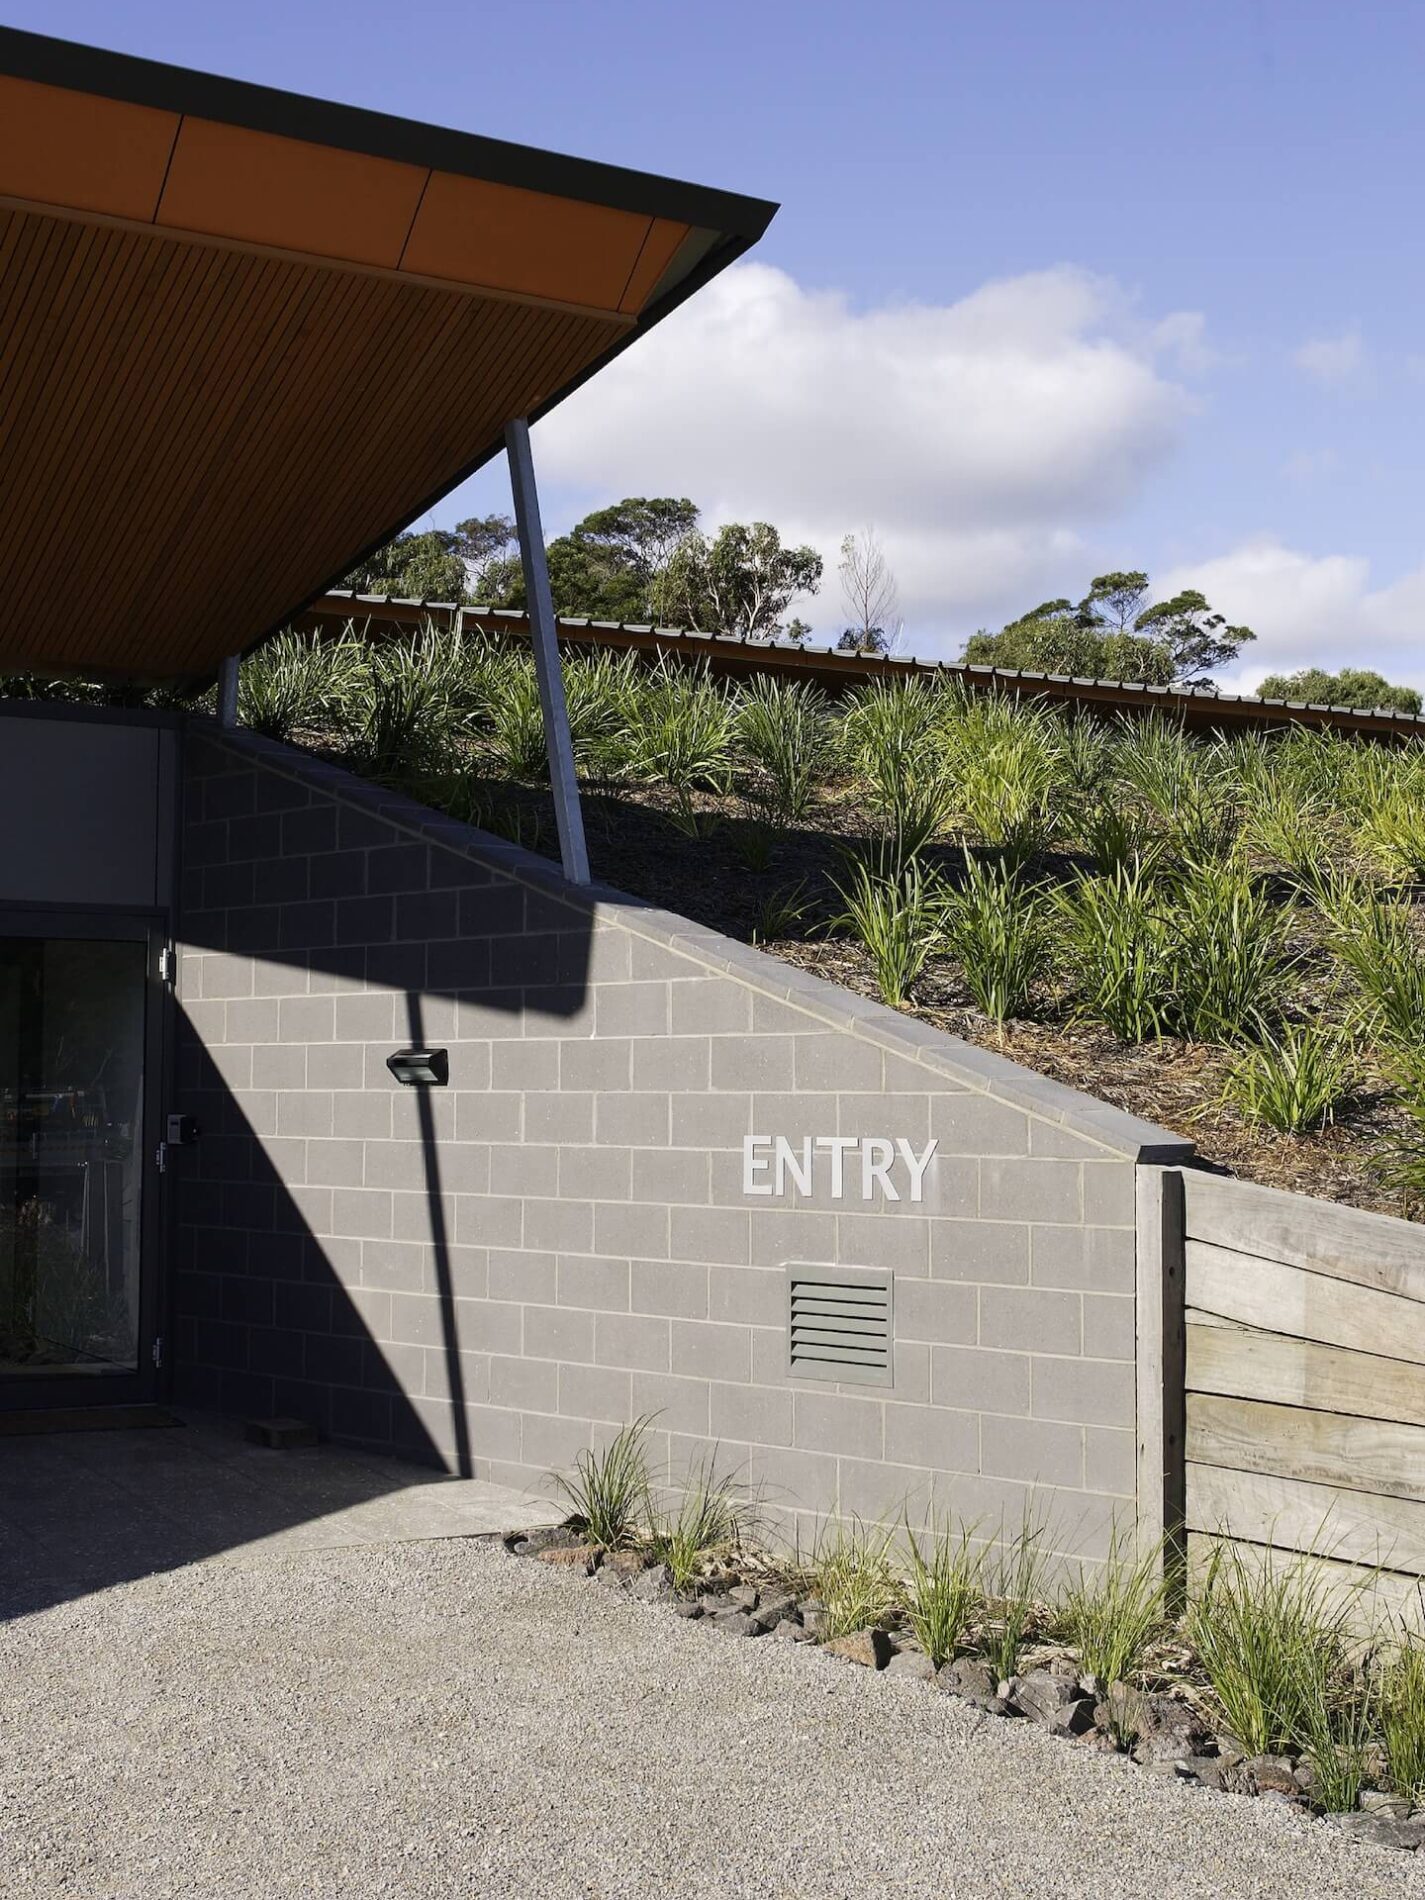 Canopy over Besser block wall entry and grassy landscaping